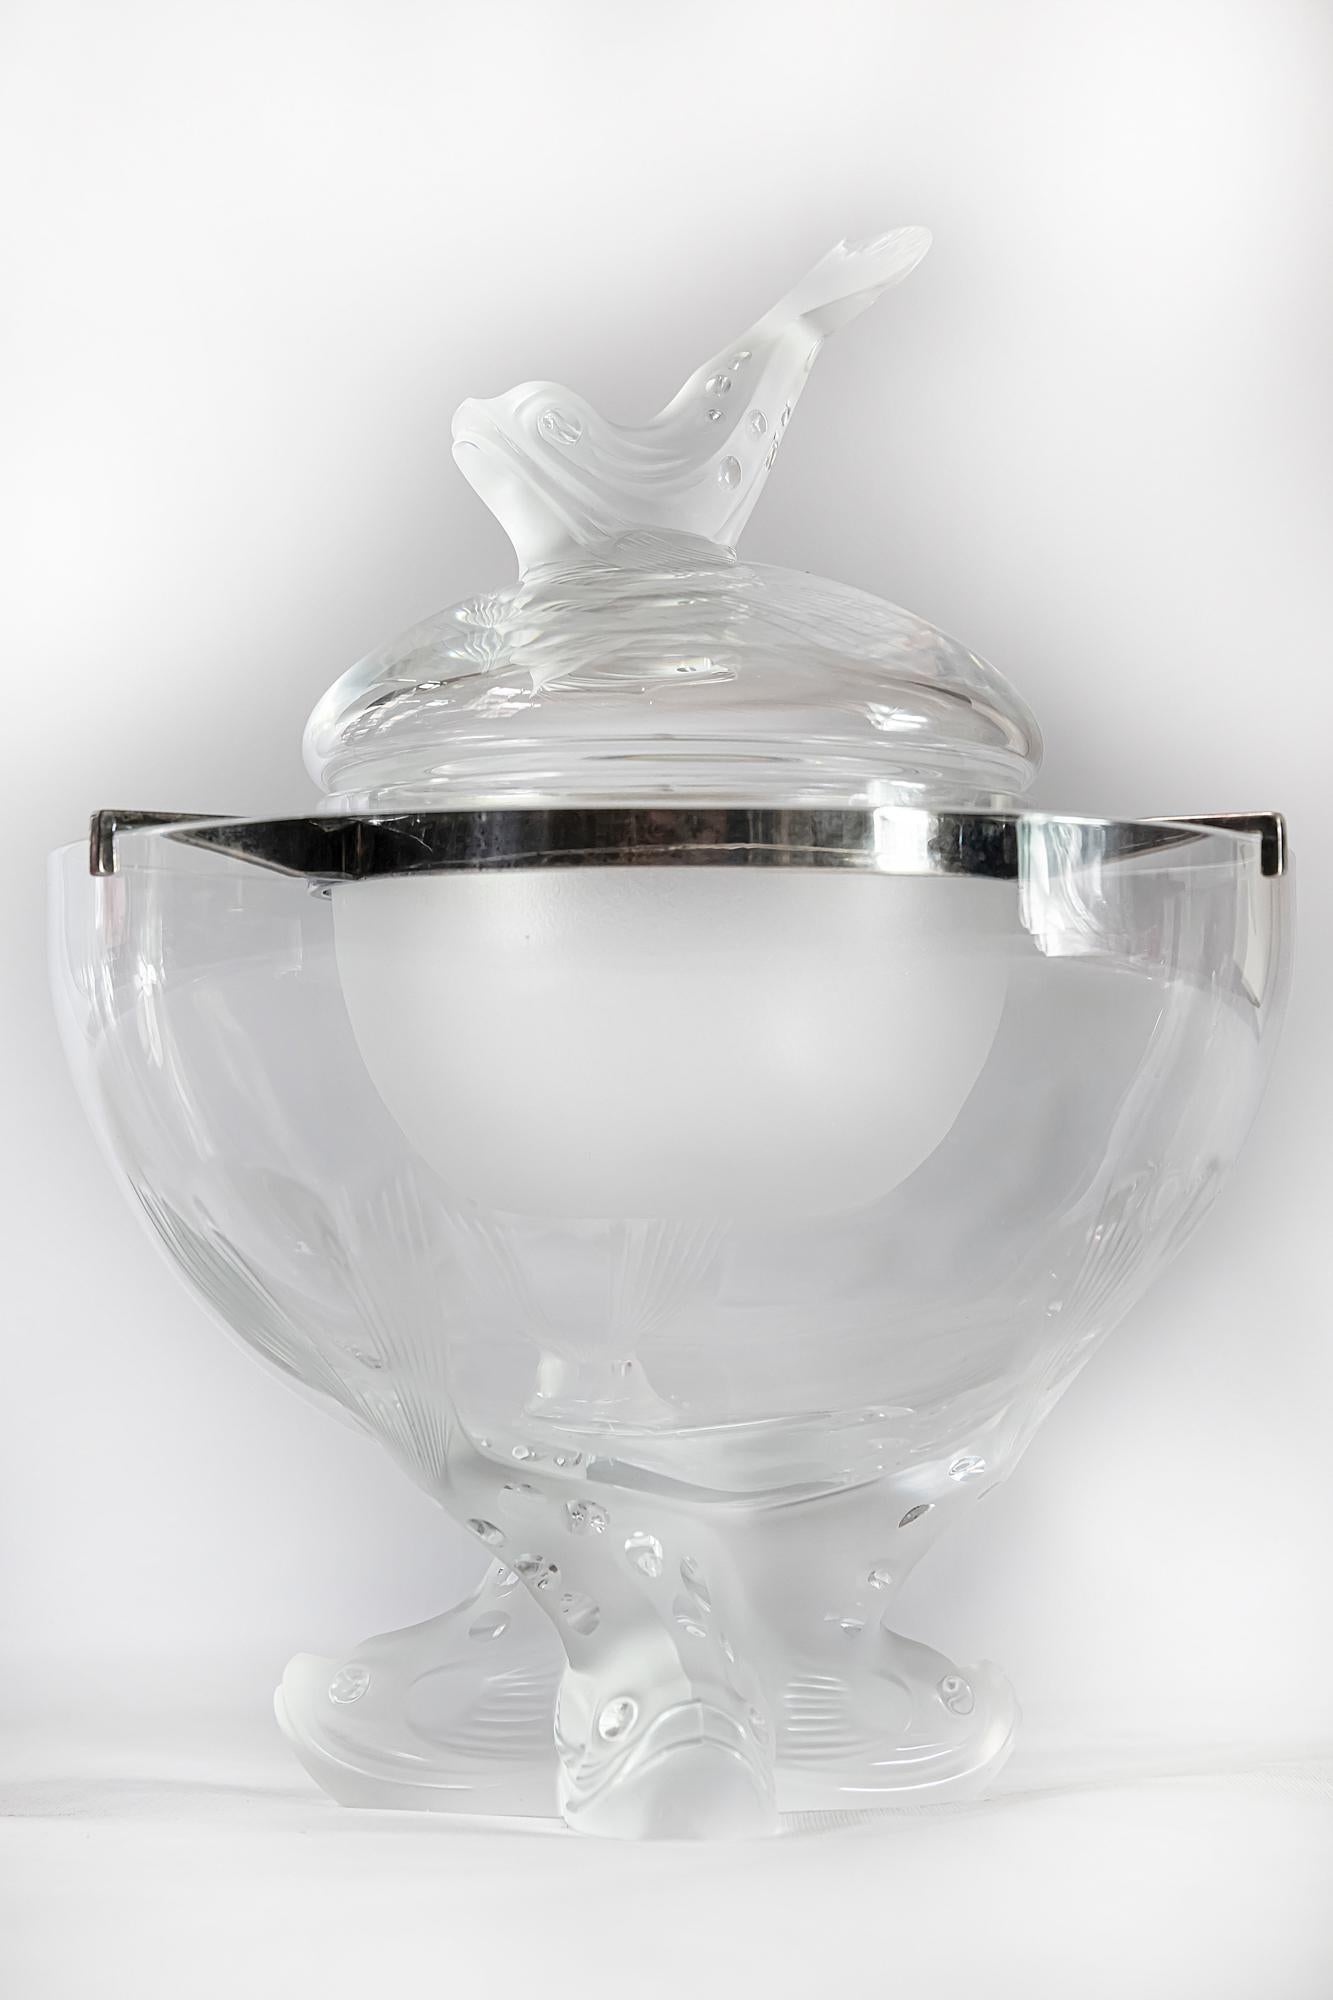 French Lalique crystal Ingor caviar serving bowl set consists of four items.
The bowl is decorated with matte surface fish motives, engraved elements.
Signed both on main and small bowls.